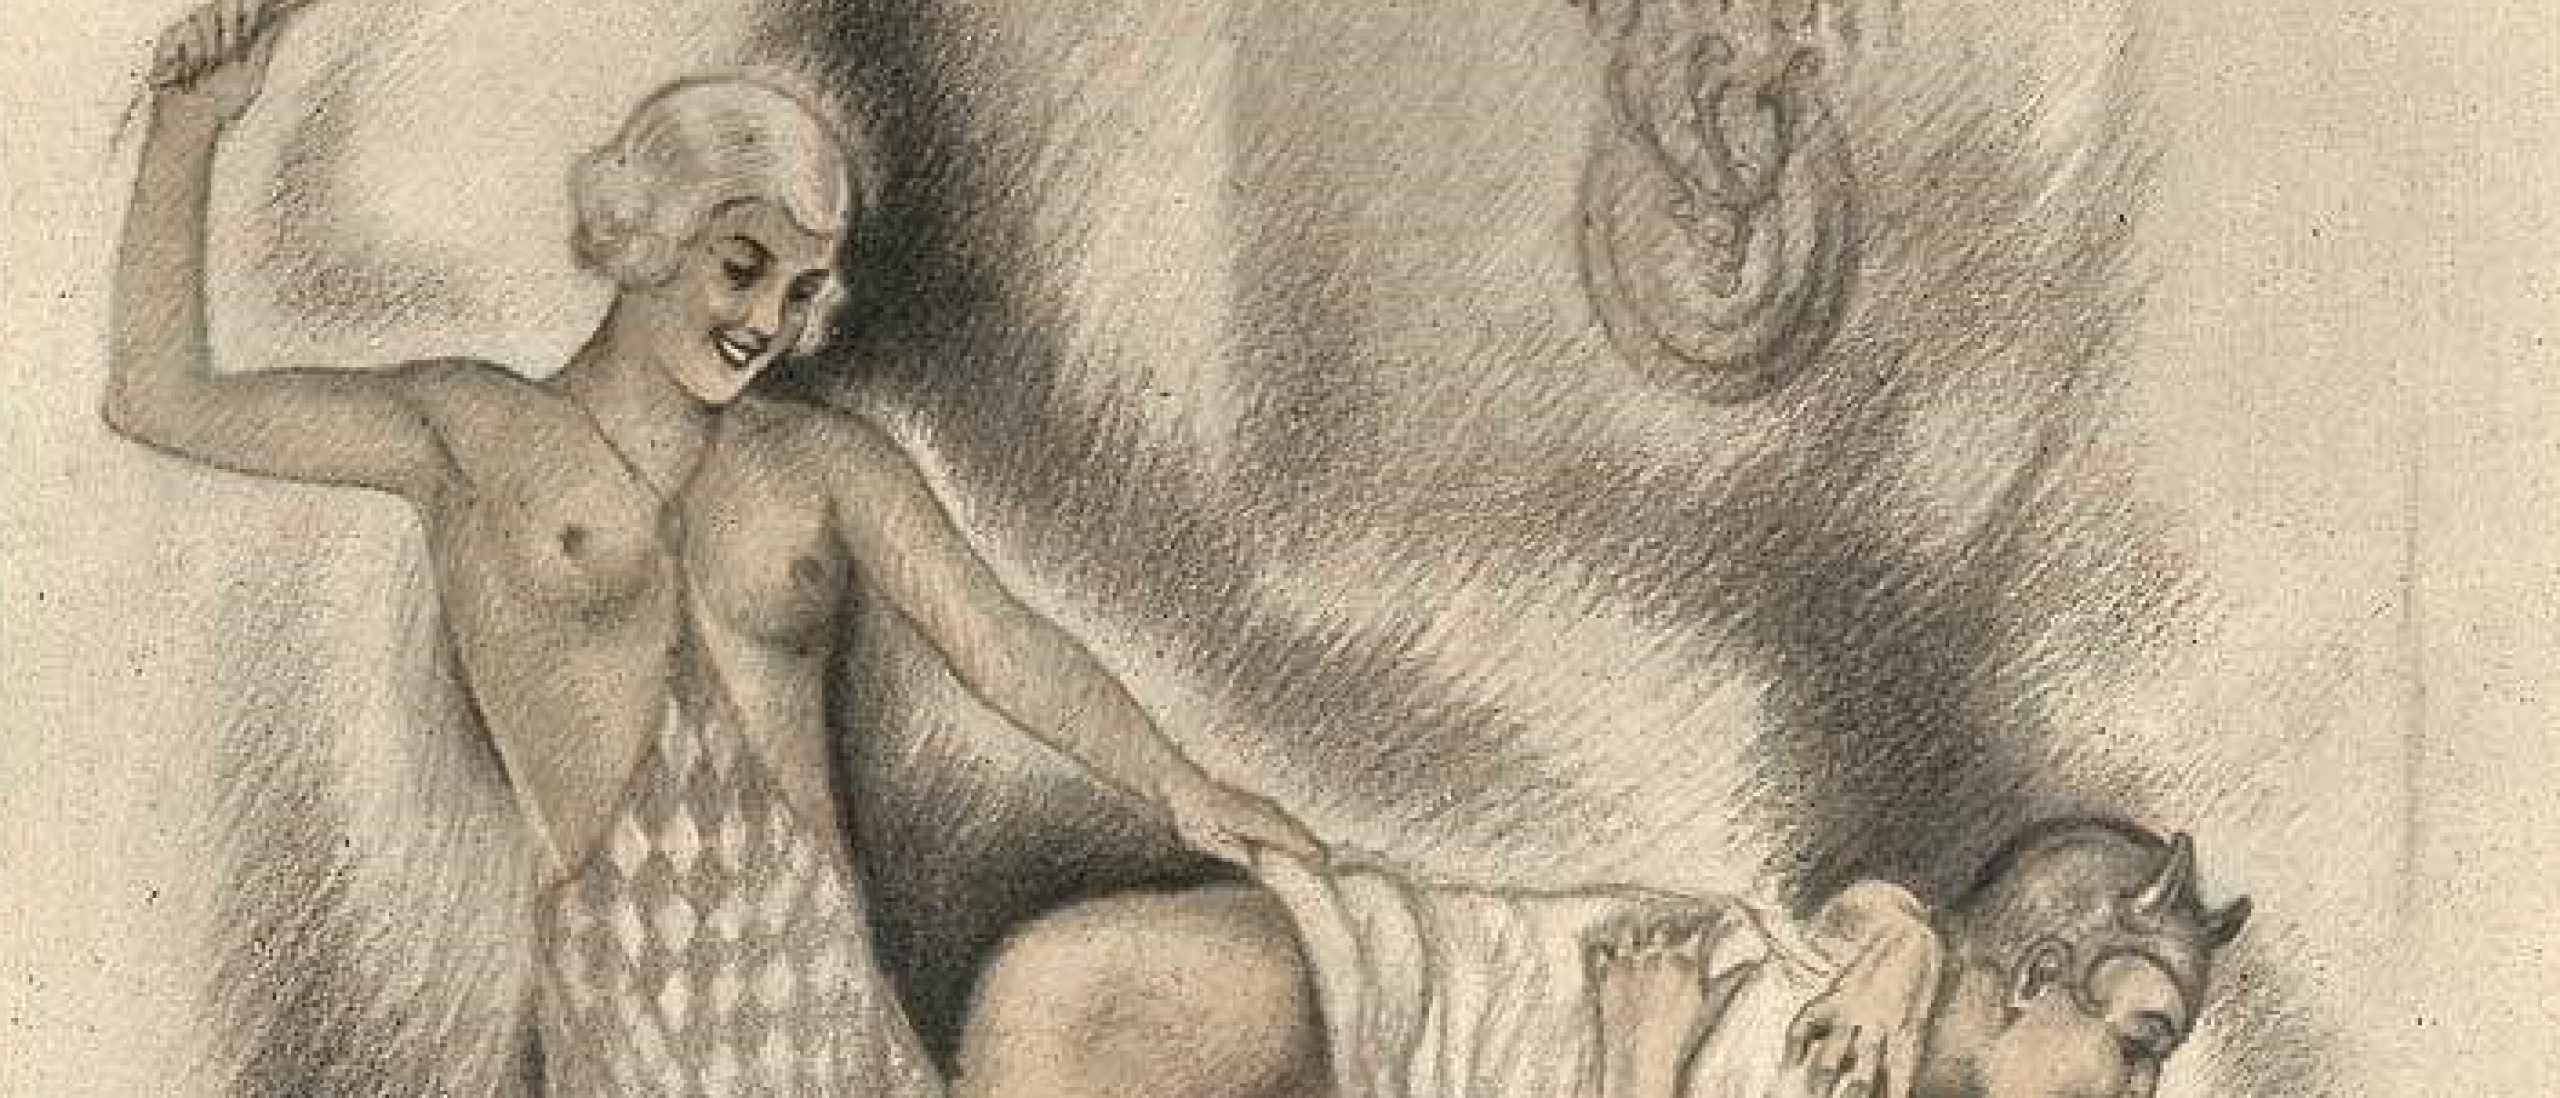 All About Love: The Lustful Circus In The Drawings Of Eugène Reunier